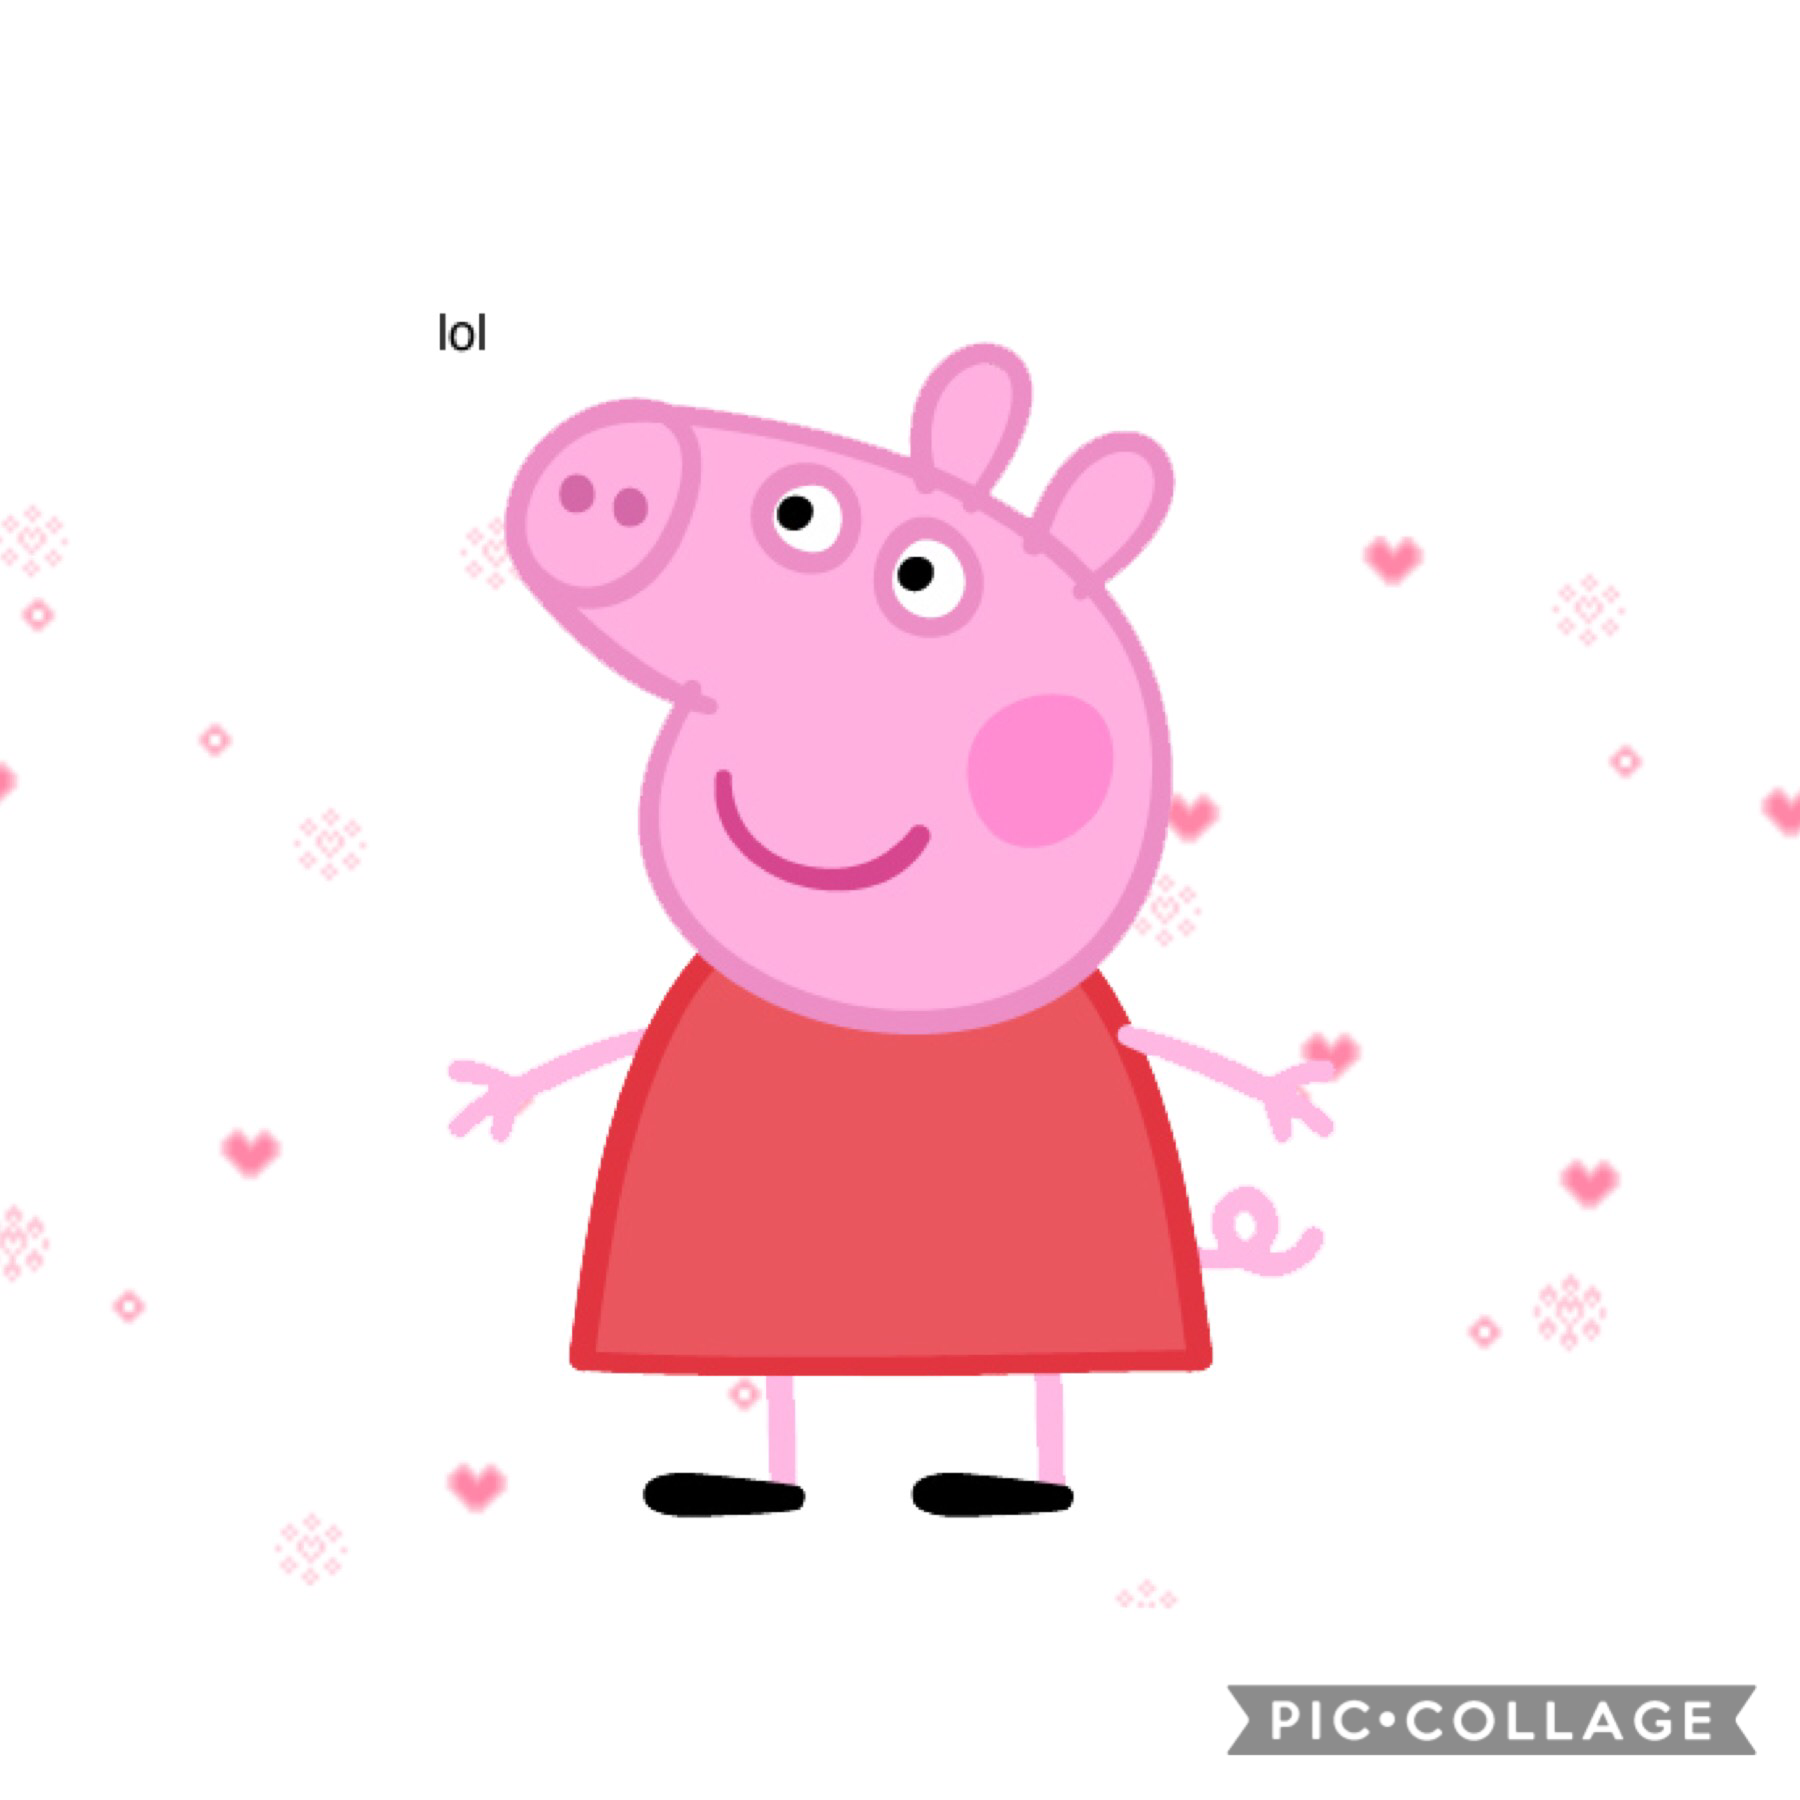 hEy gUyS i’m not dead lol talk to meee ;-; i really miss talking to y’all😔
how have you been?
i’ve been kinda busy with school lol i’m trying to get good grades (i got 82% on physics and chemistry i’m really happy uwu)

anyways here’s peppa bc like-

stan